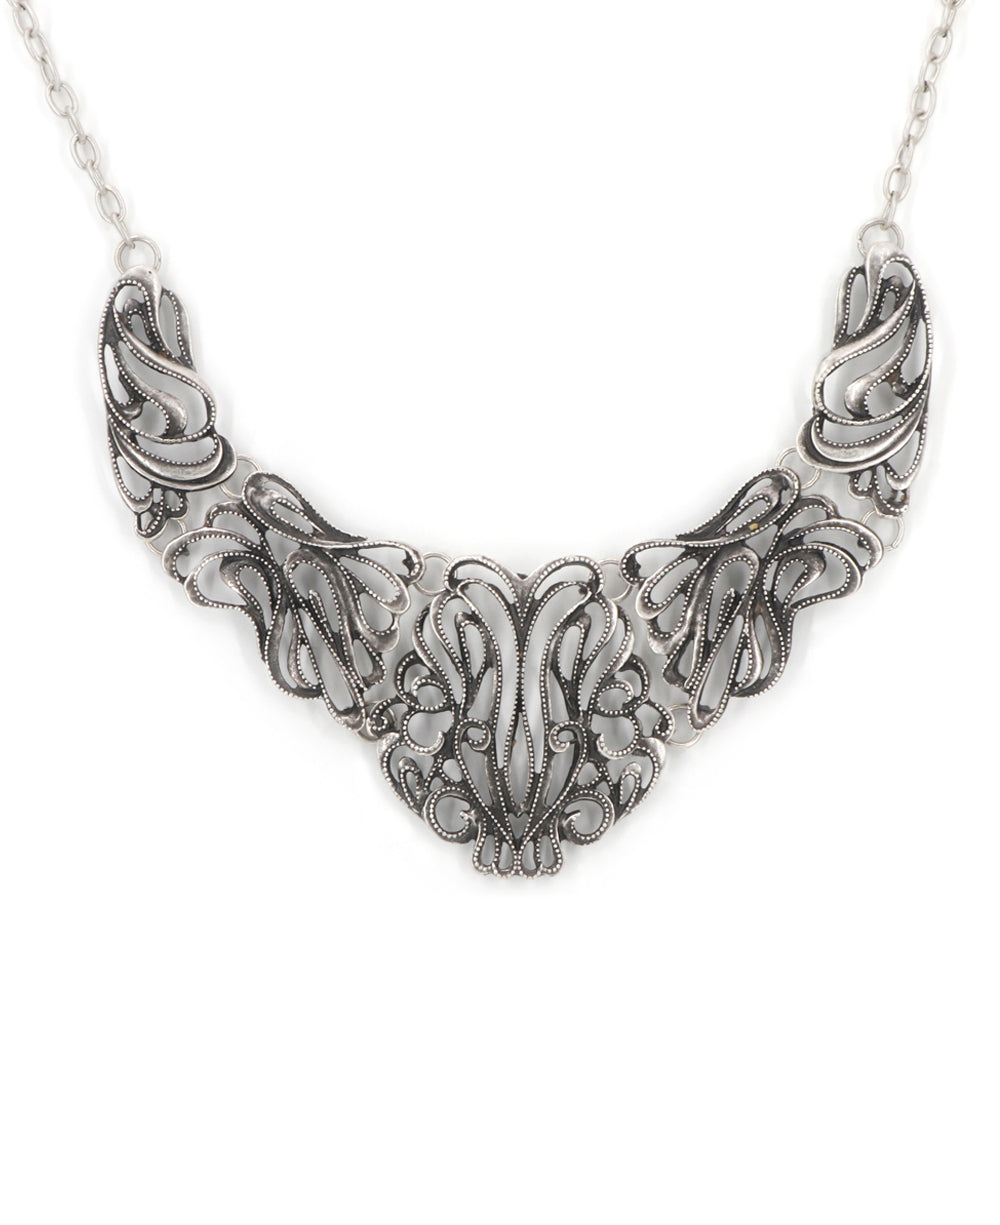 Regal crown-like statement necklace